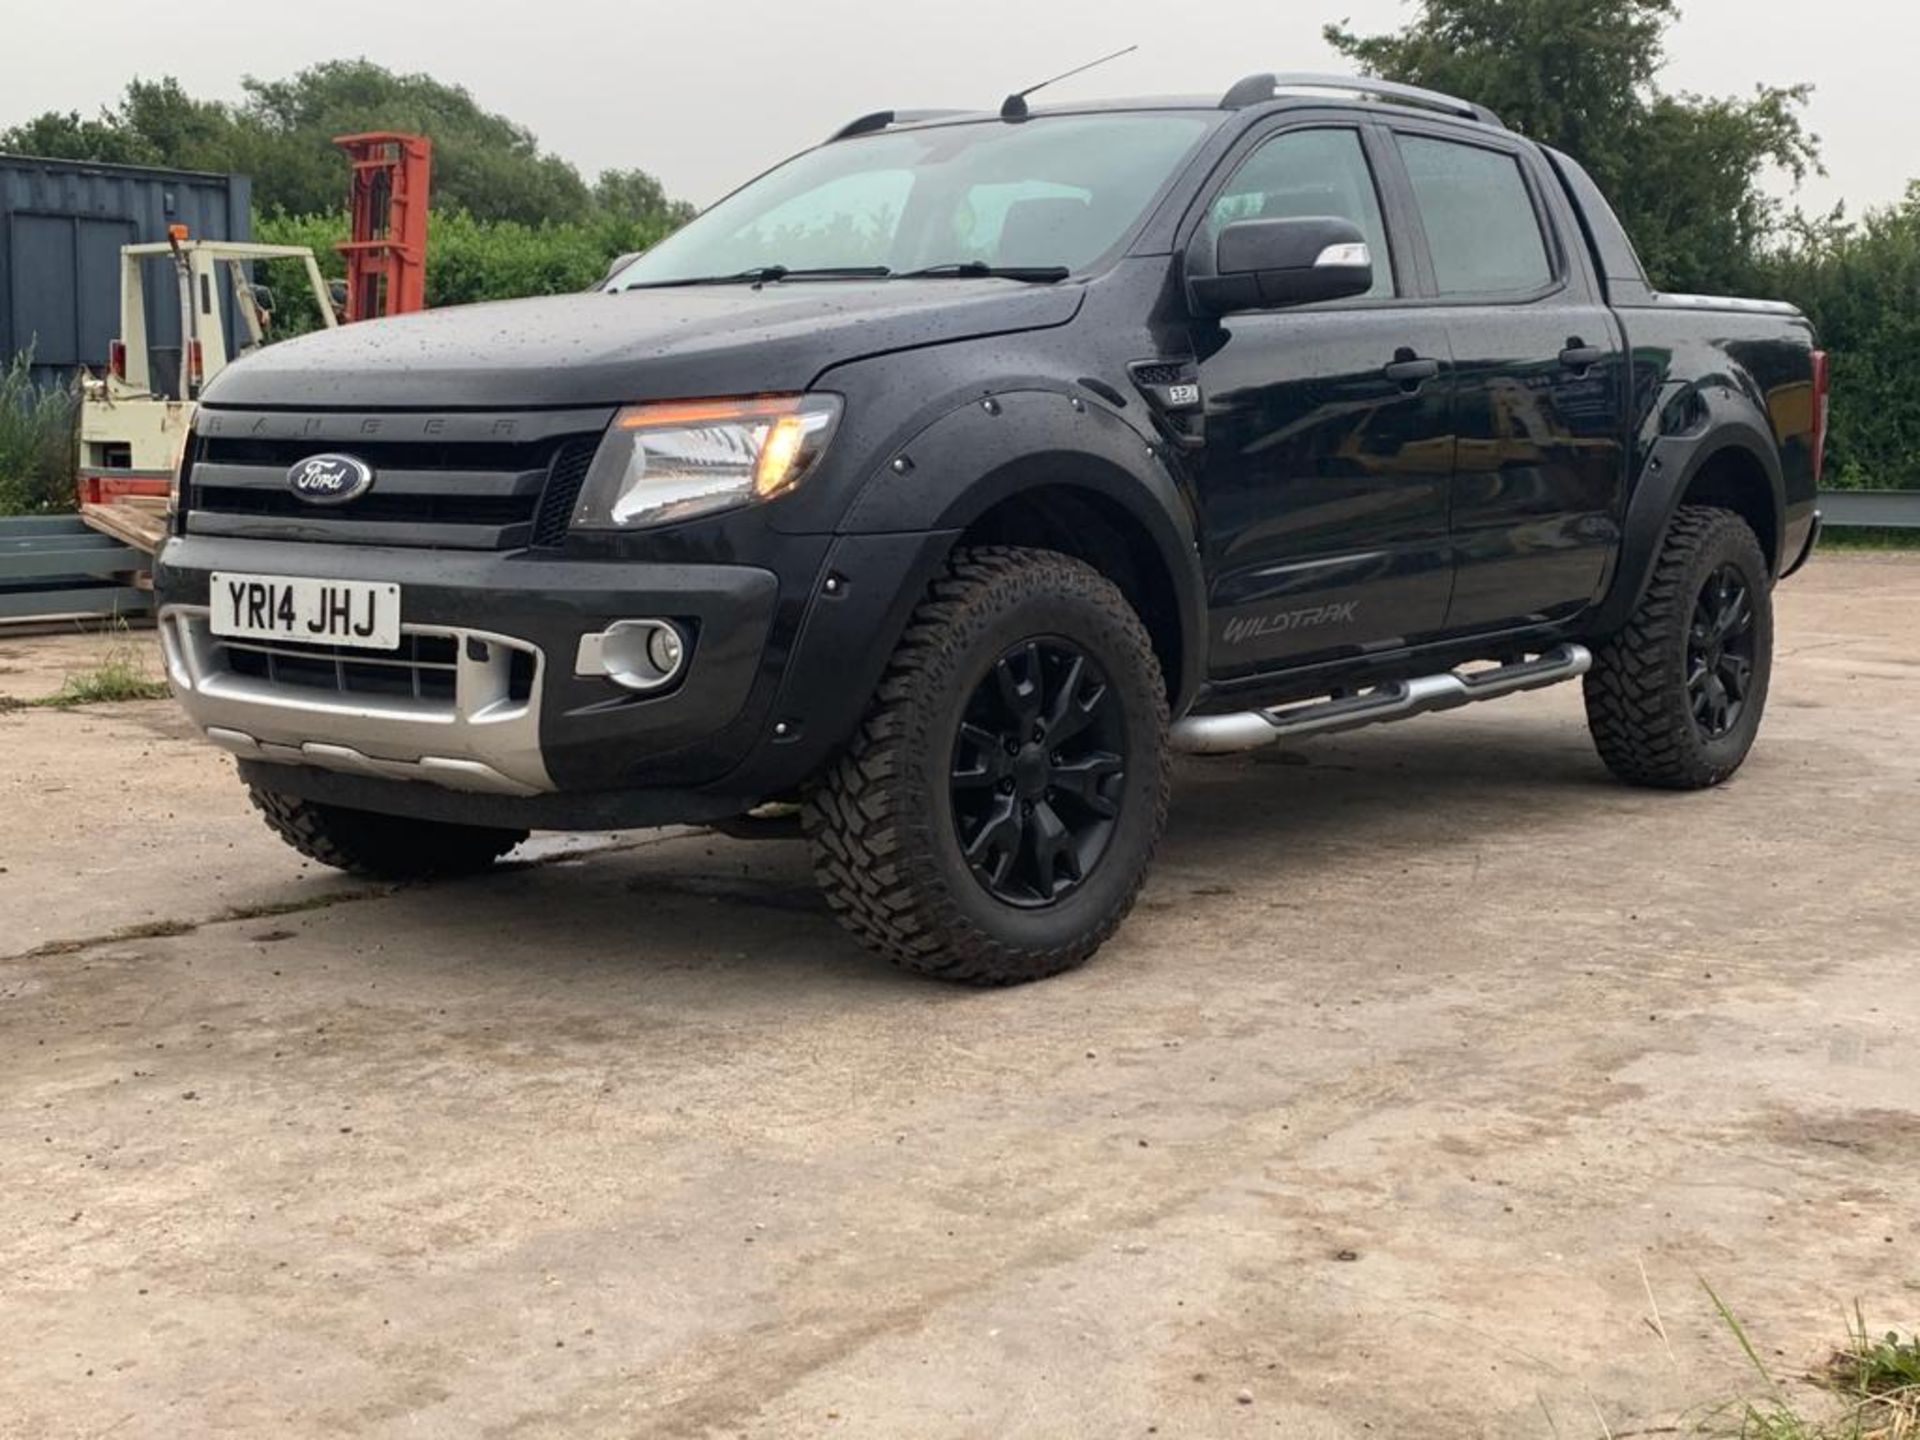 2014/14 REG FORD RANGER WILDTRAK 4X4 D/C TDCI 3.2L AUTOMATIC BLACK PICK-UP, SHOWING 2 FORMER KEEPERS - Image 3 of 9